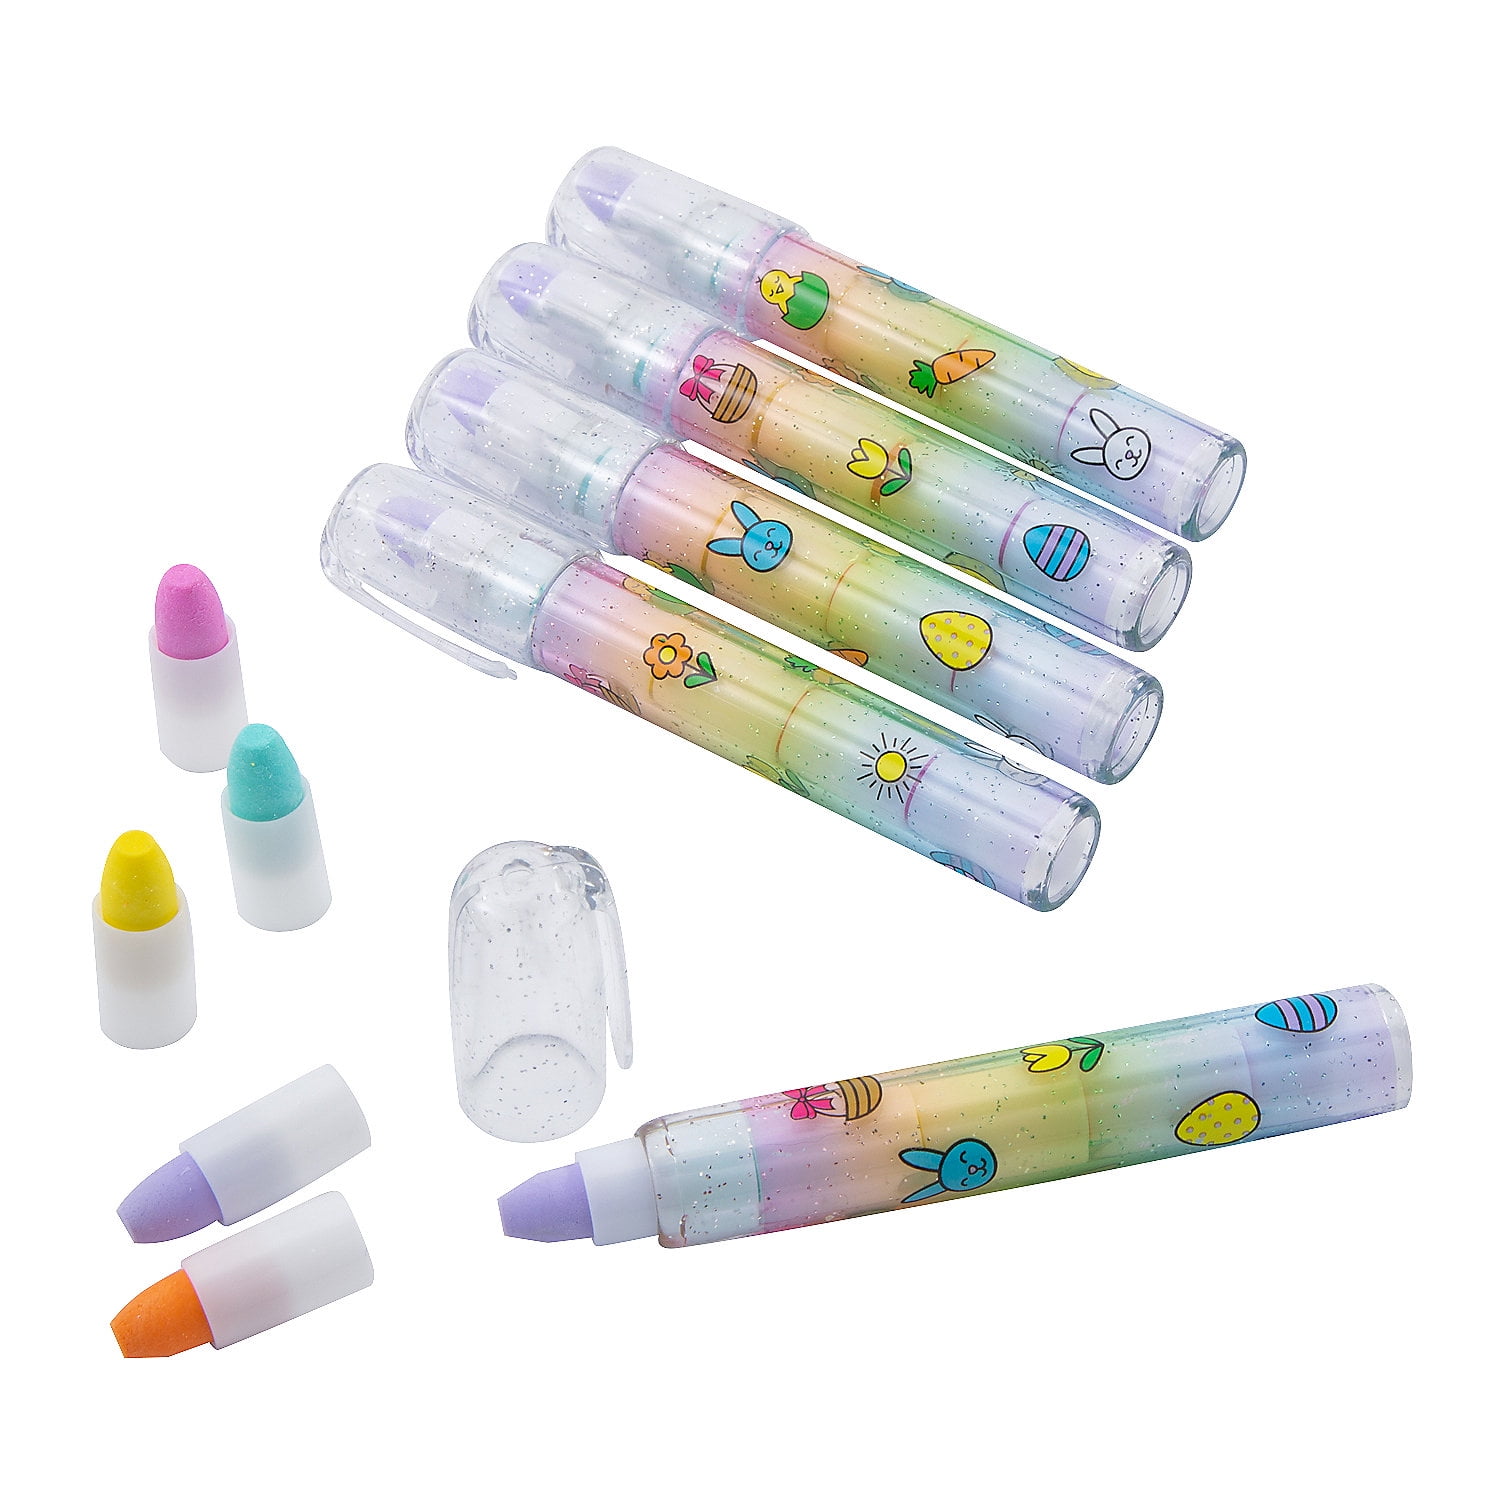 White erasers - Erasers for Kids, 60 Count Erasers, Erasers Bulk, Pencil  Eraser for School Supplies, Erasers for Artist, and Office Use